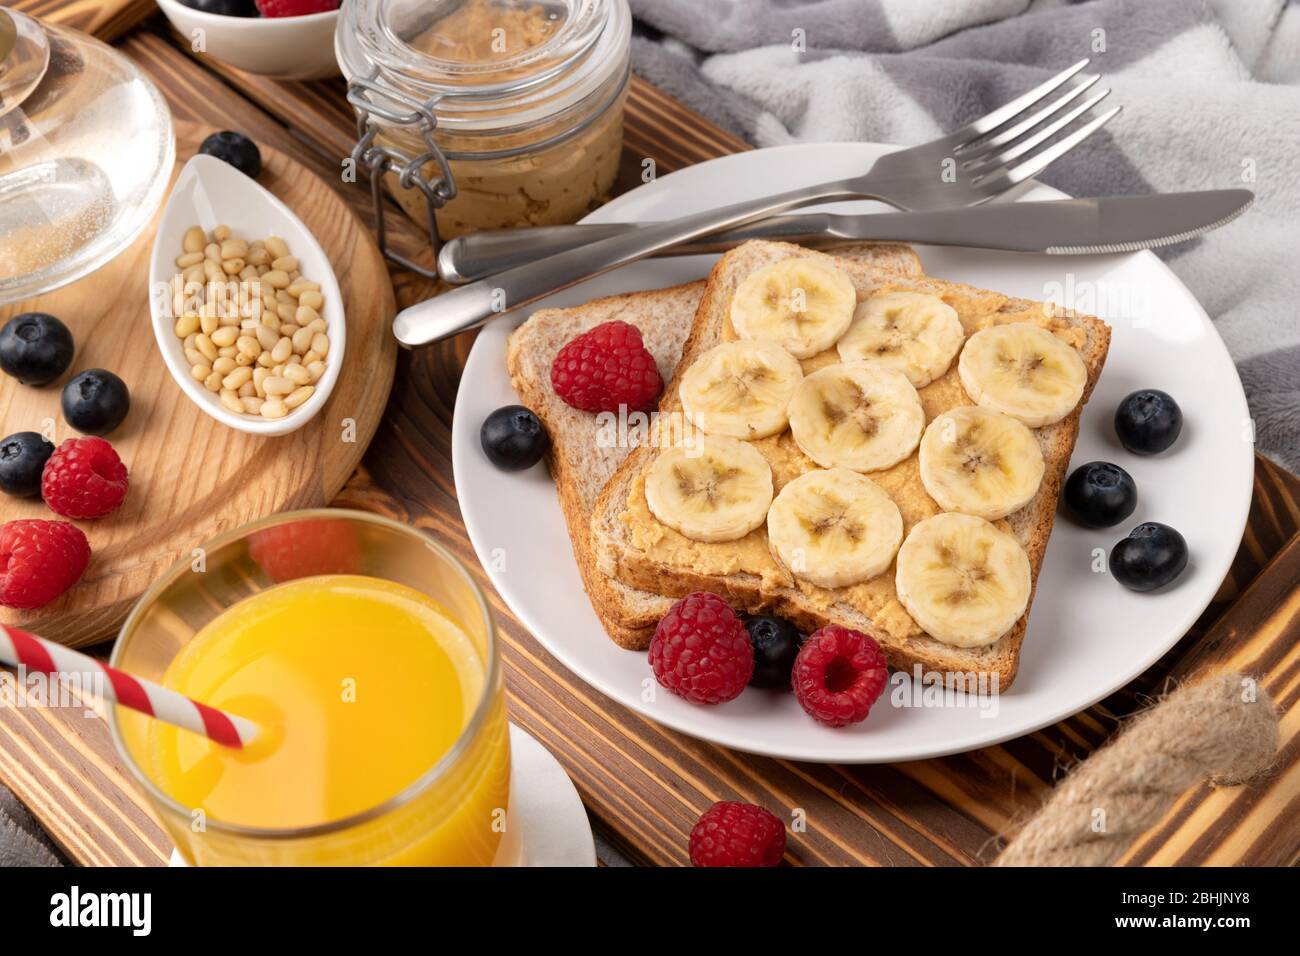 Breakfast in bed. Wooden tray with glass of orange juice and sandwich with berries Stock Photo